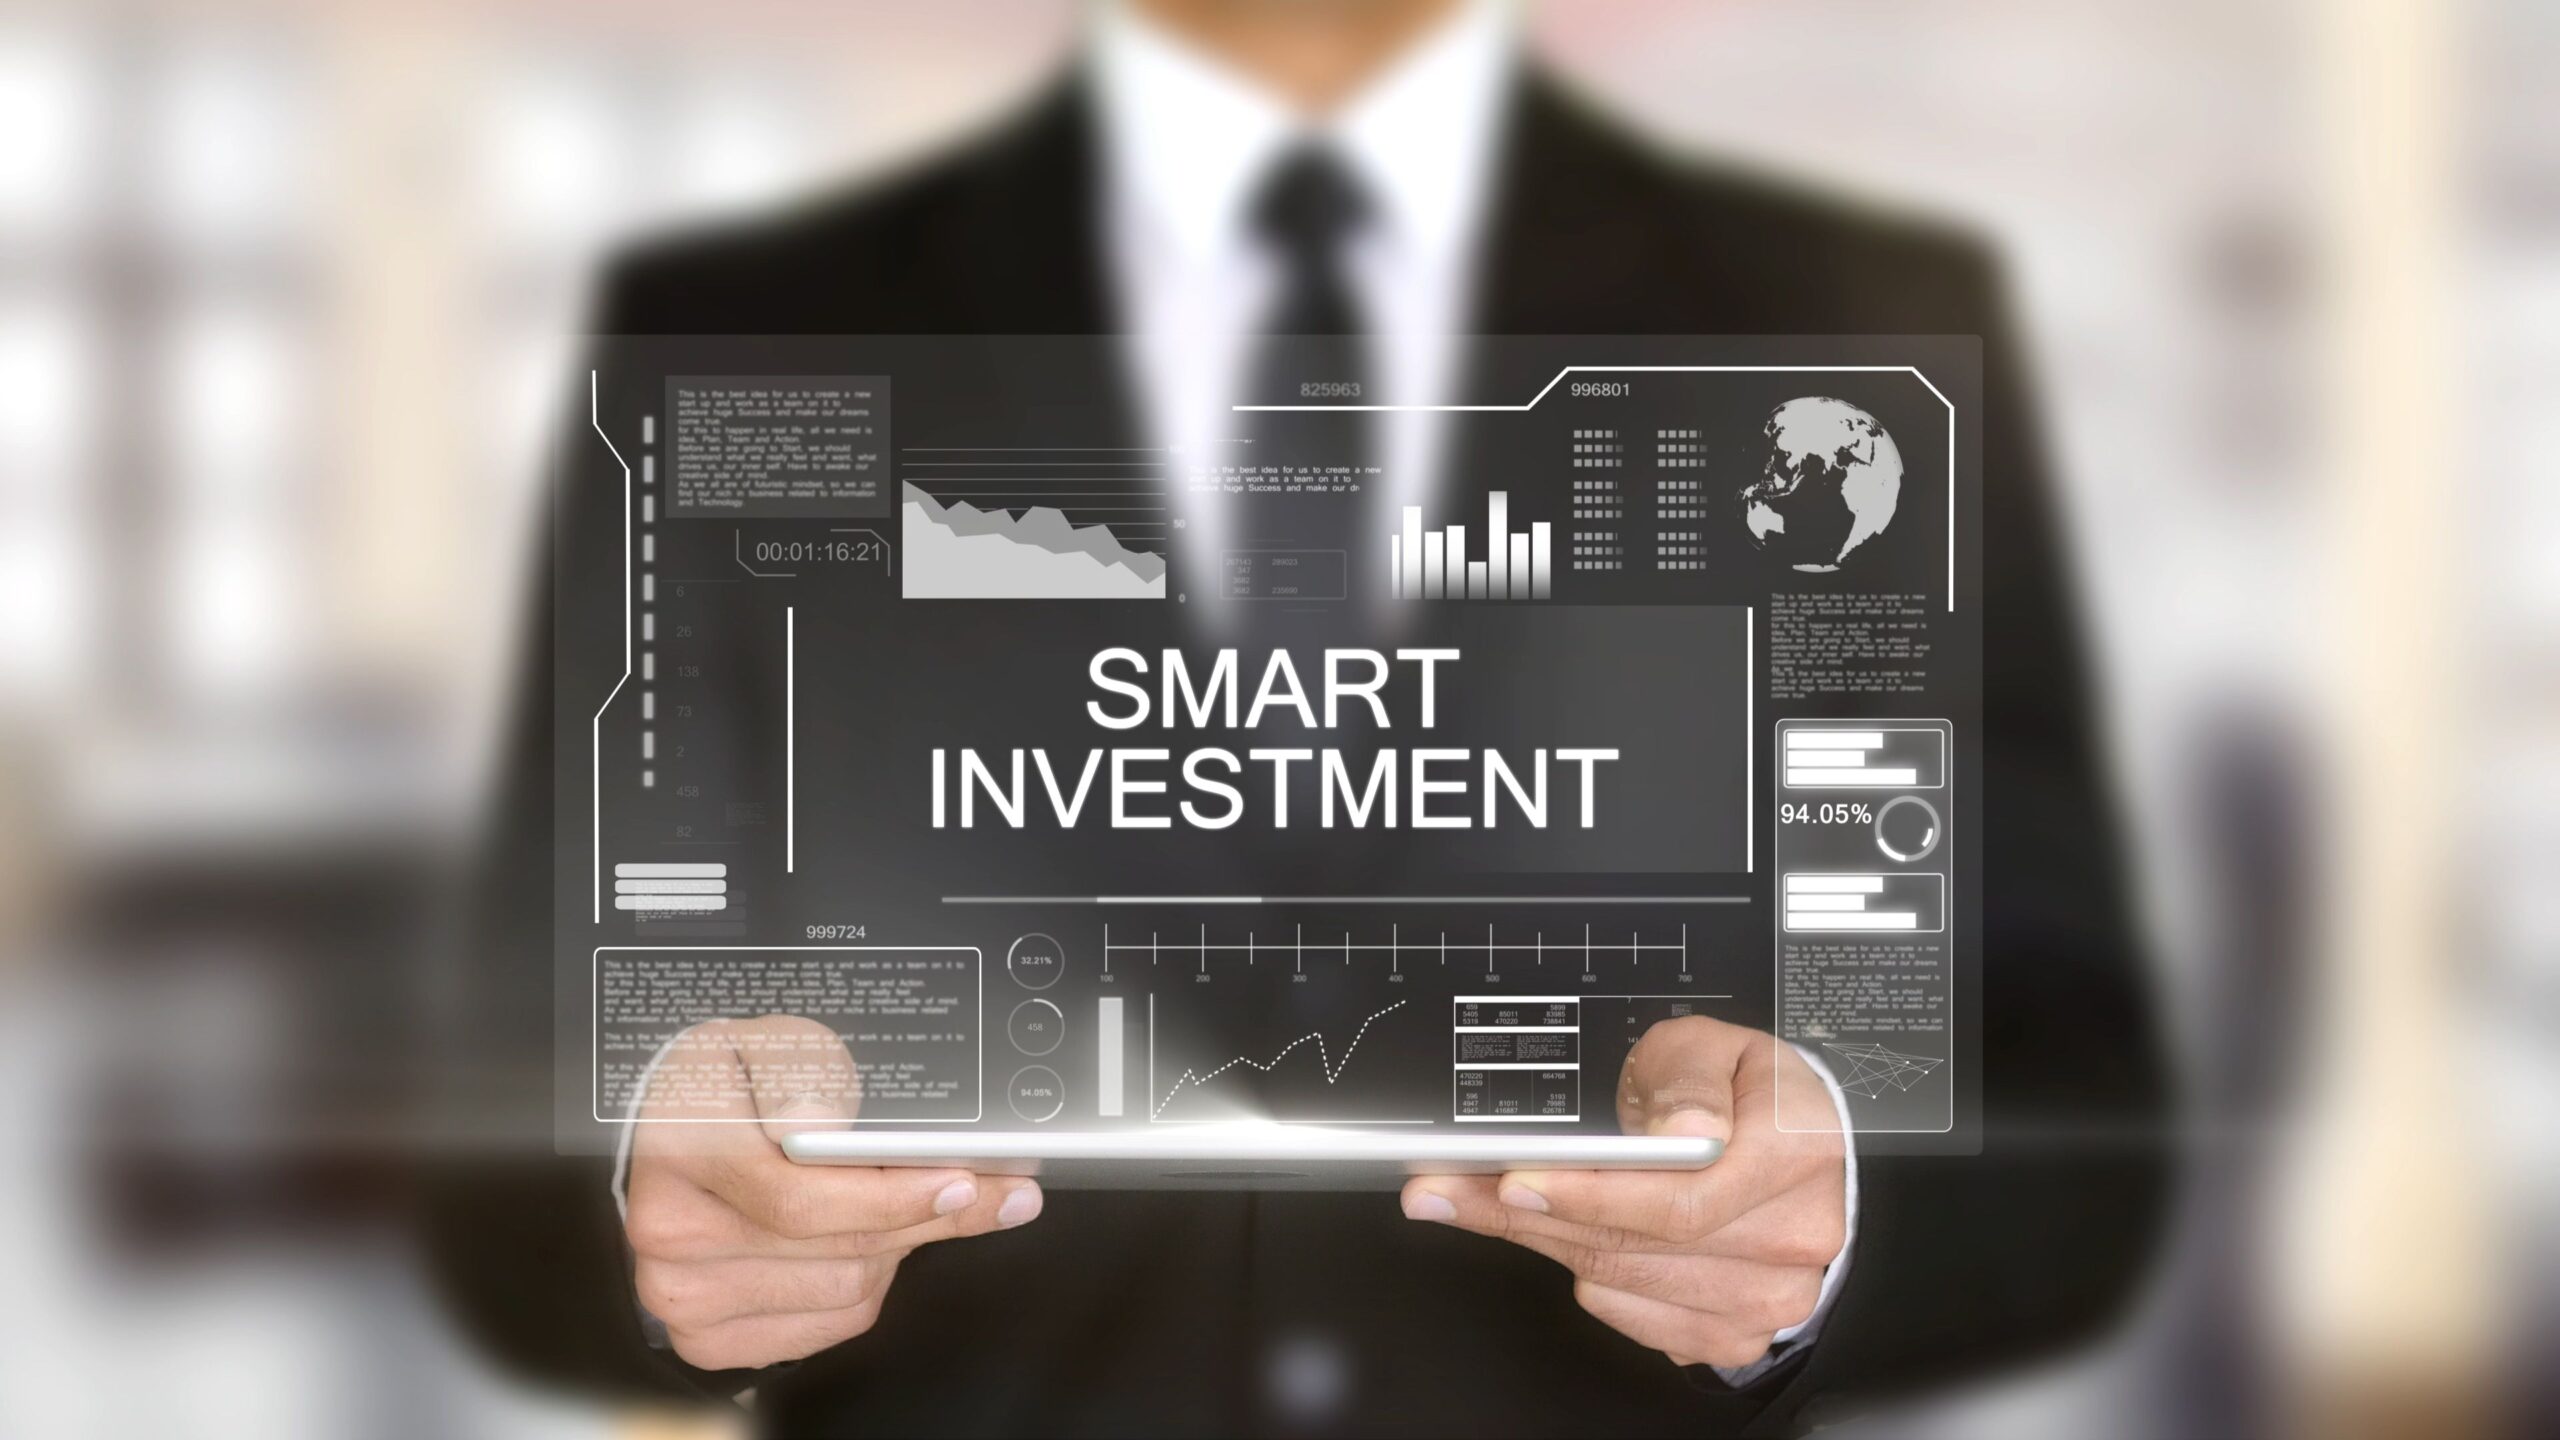 A Business Management System is a Smart Investment for your Business